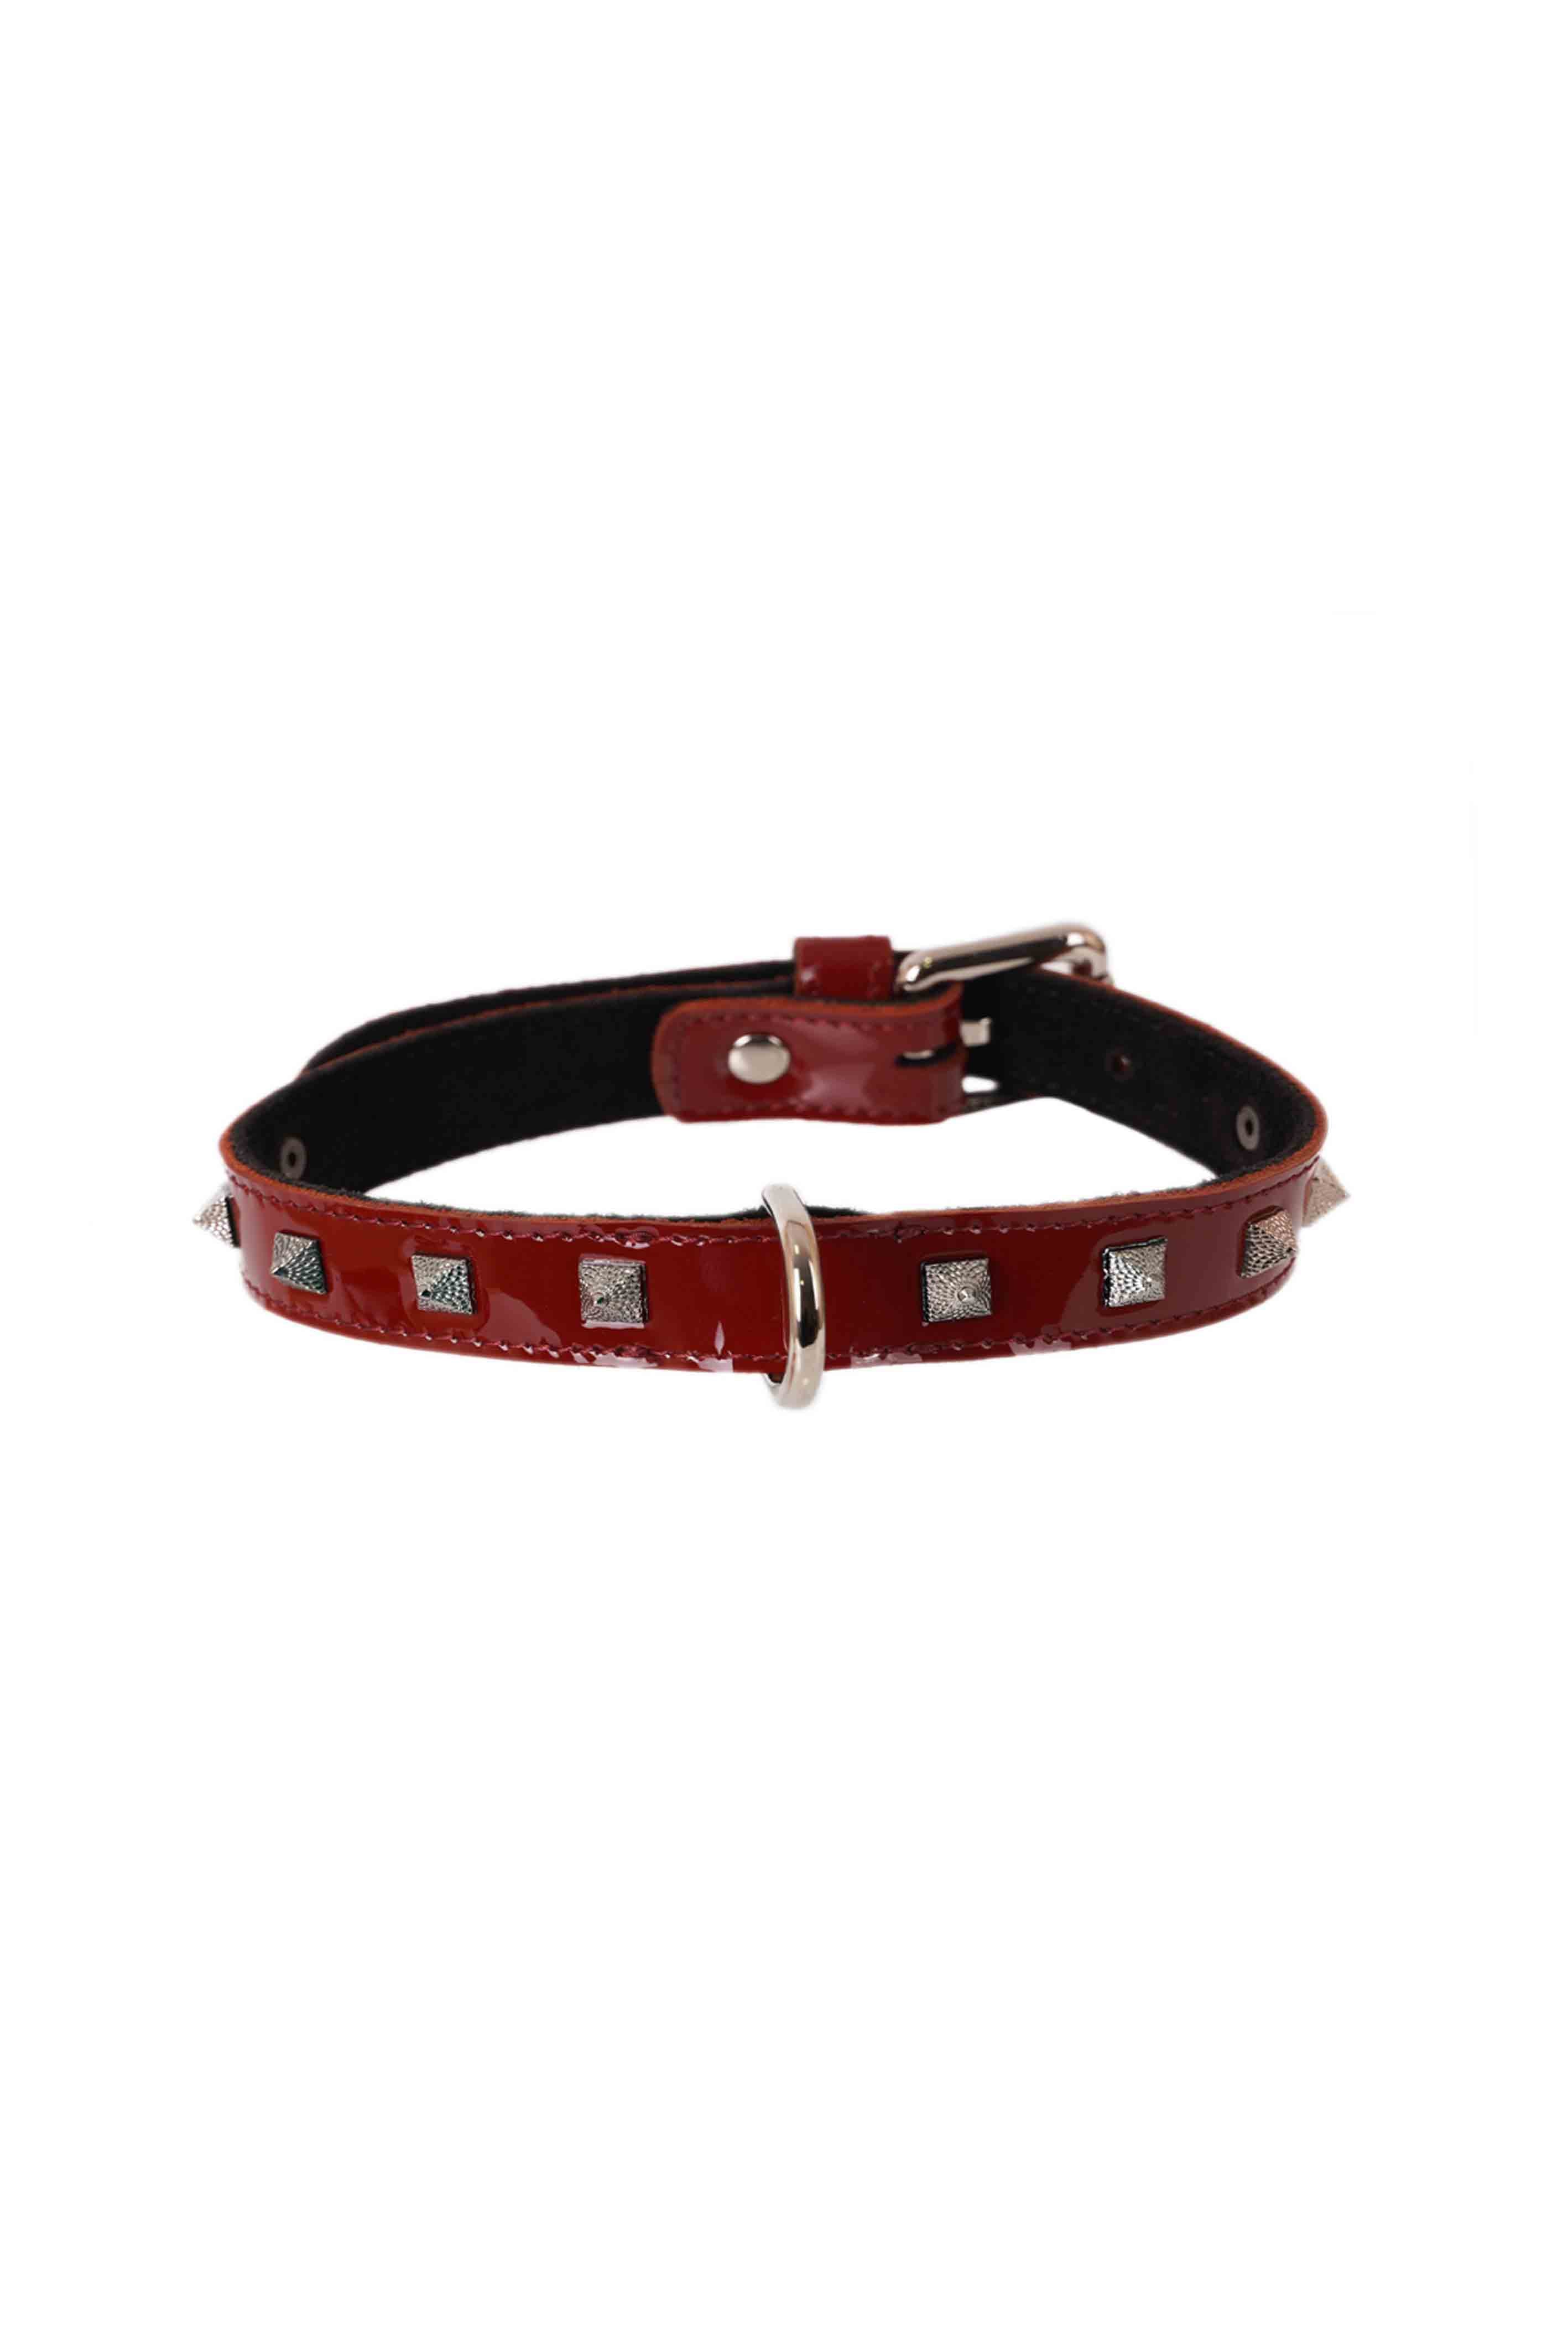 Lacquered Leather Spiked Choker. Burgundy